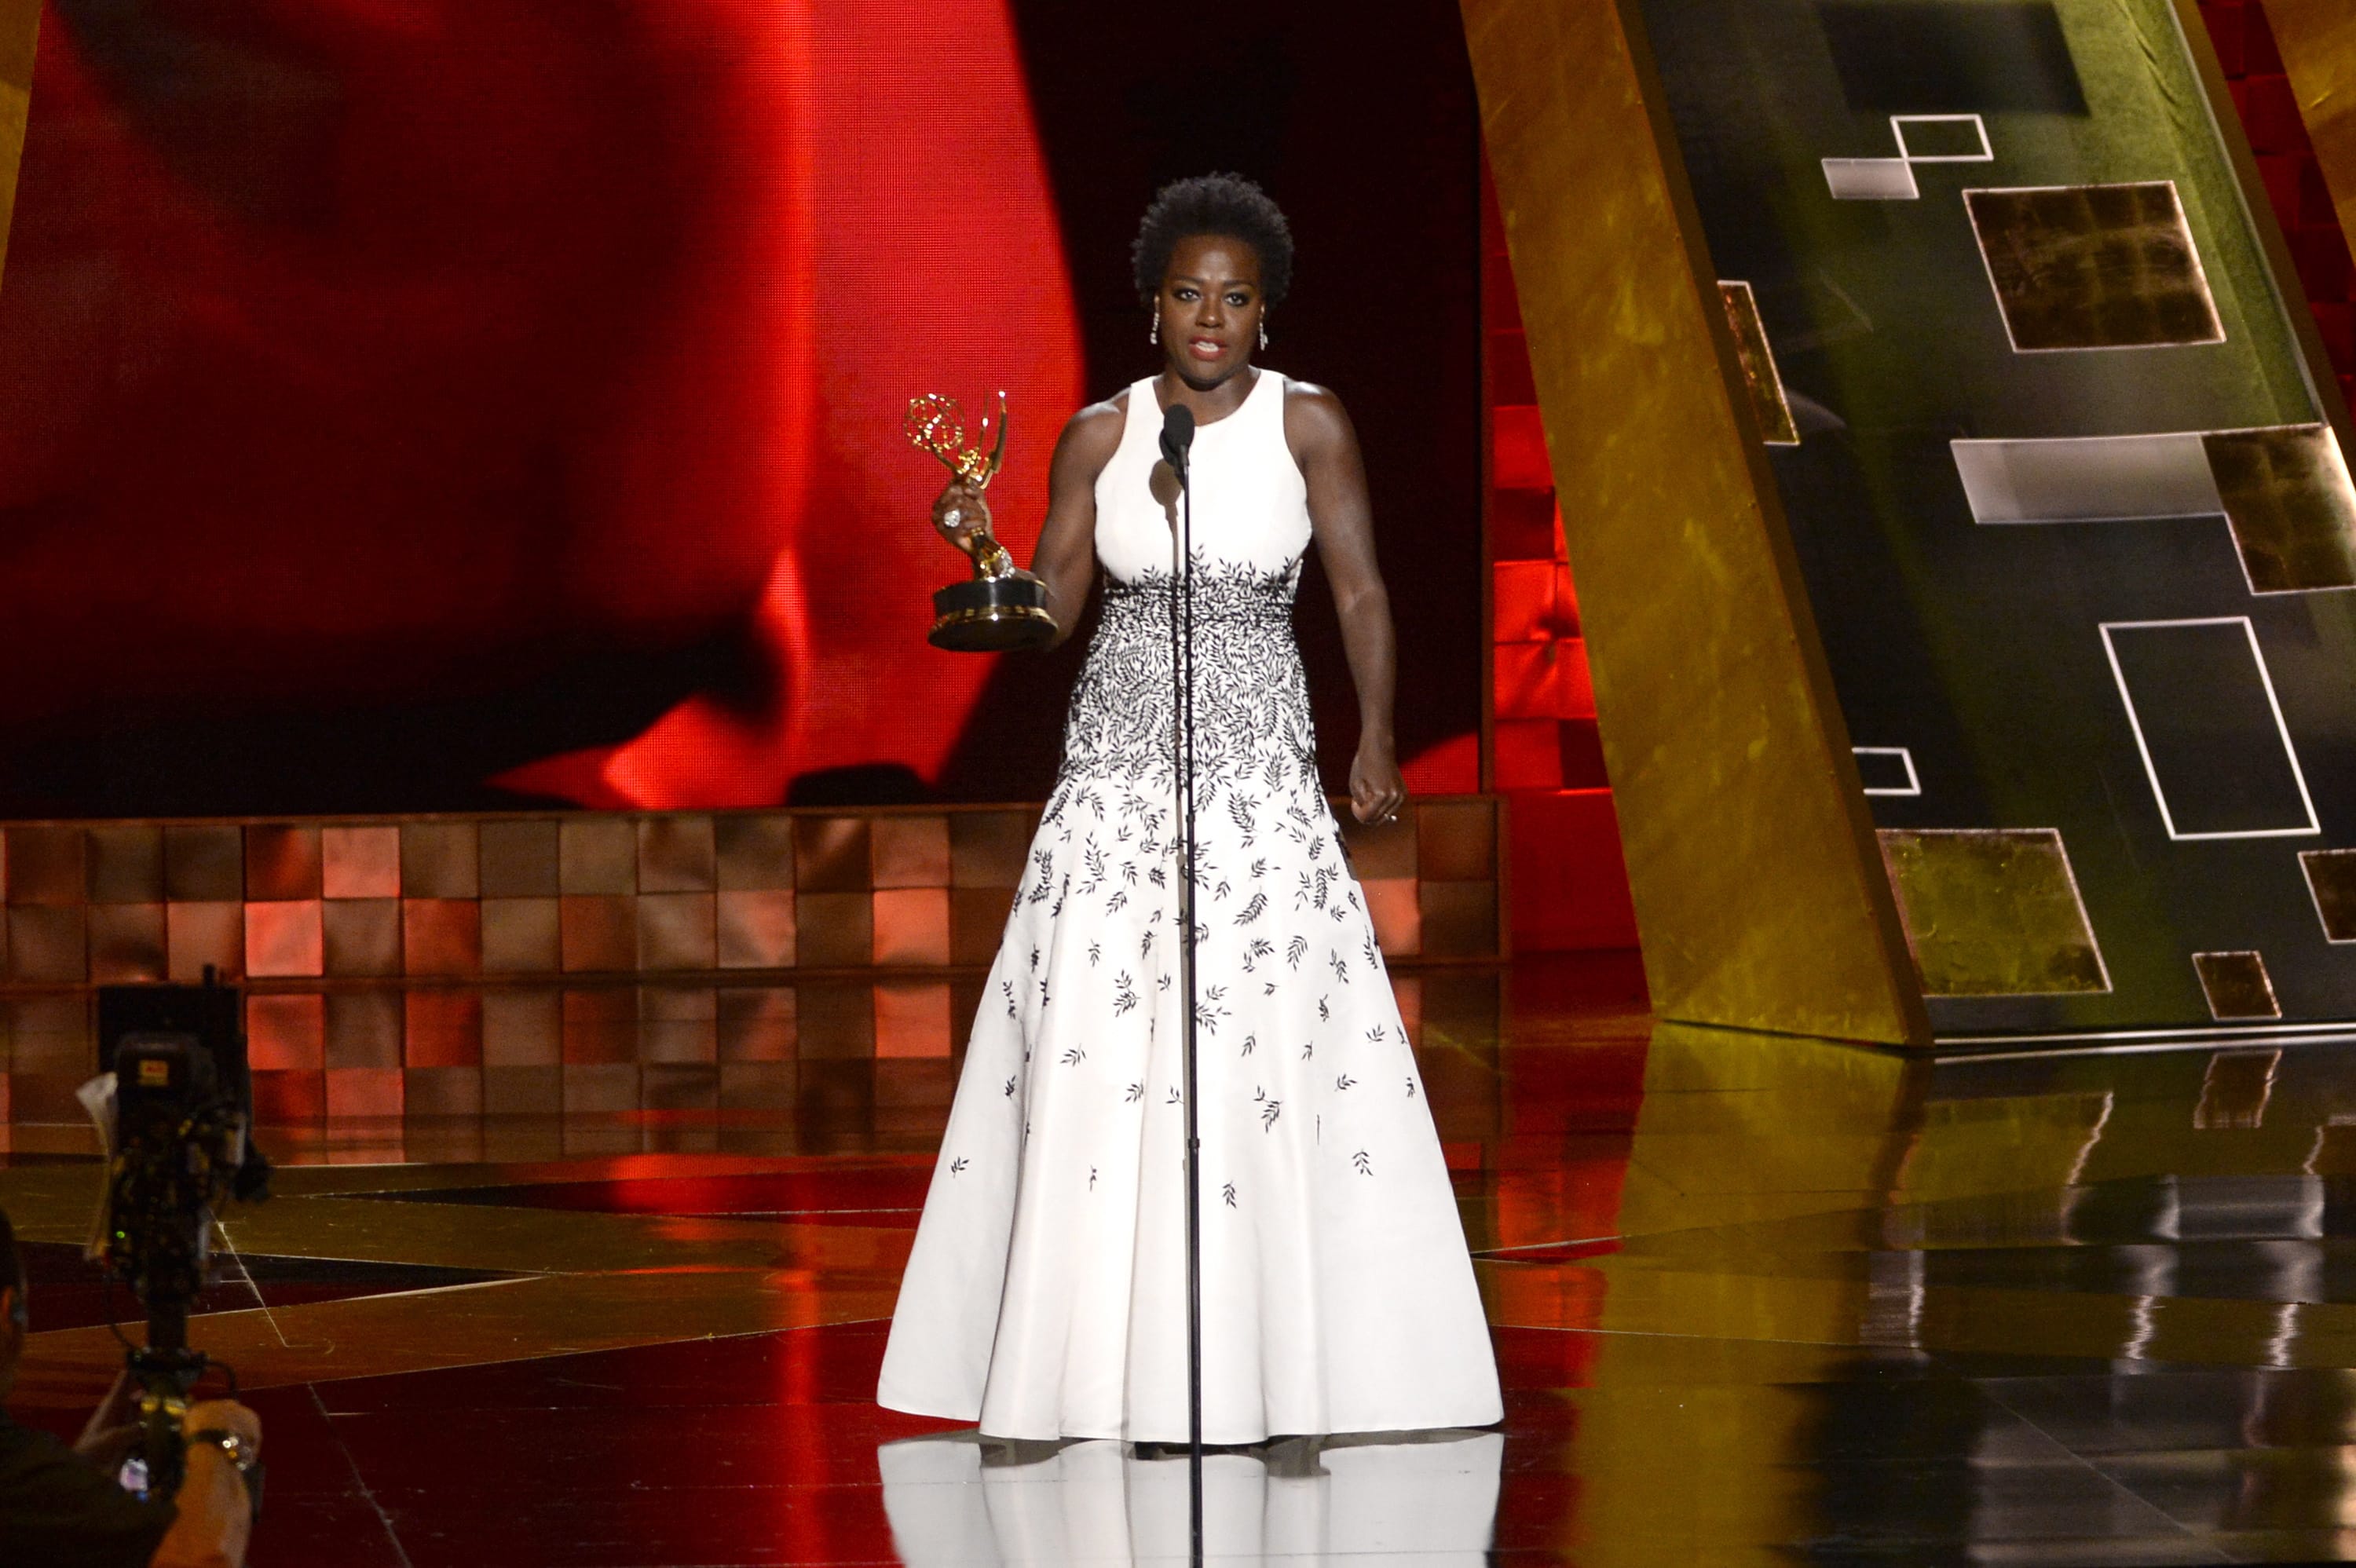 Viola Davis accepts the award for outstanding lead actress in a drama series for "How to Get Away With Murder" at the 67th Primetime Emmy Awards on Sunday, Sept. 20, 2015, at the Microsoft Theater in Los Angeles.